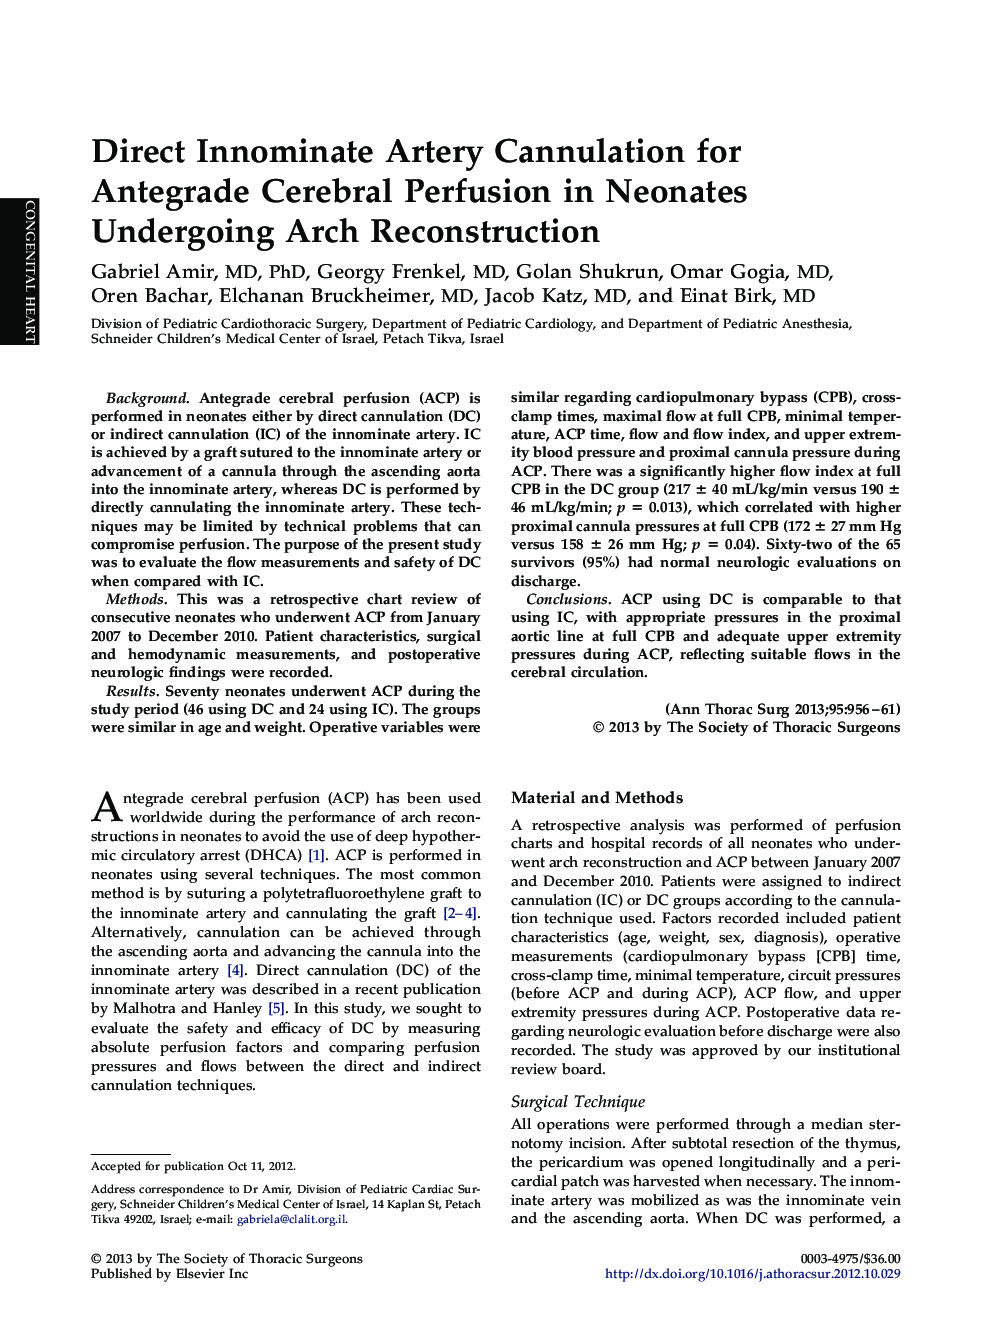 Direct Innominate Artery Cannulation for Antegrade Cerebral Perfusion in Neonates Undergoing Arch Reconstruction